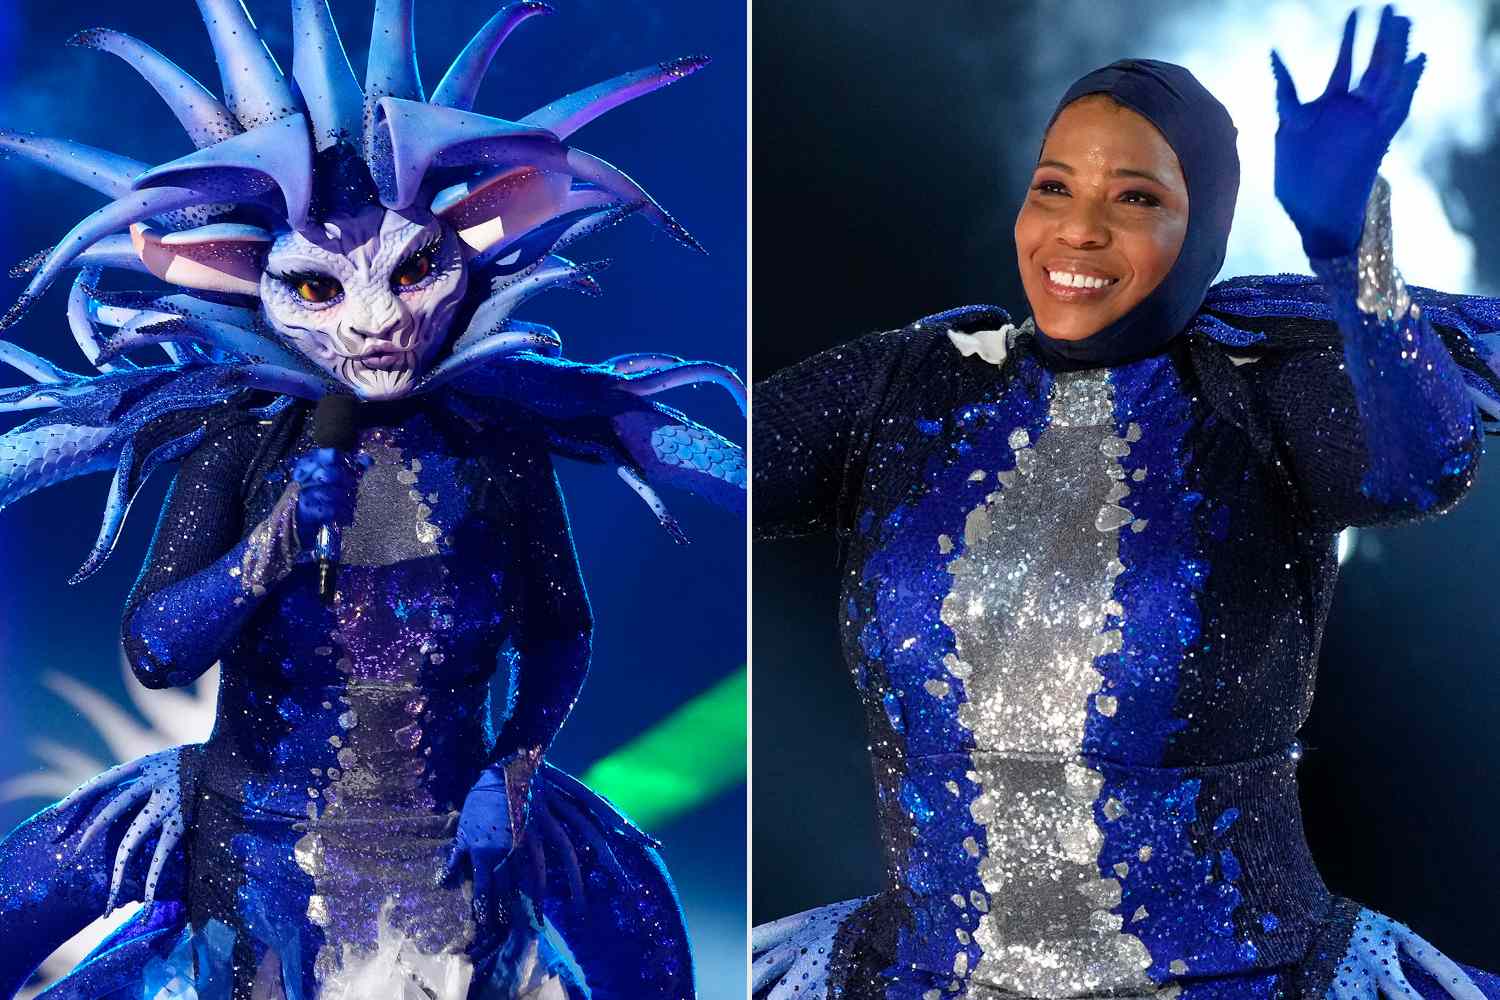 Sea Queen in costume on 'The Masked Singer' // unmasked on show as Macy Gray